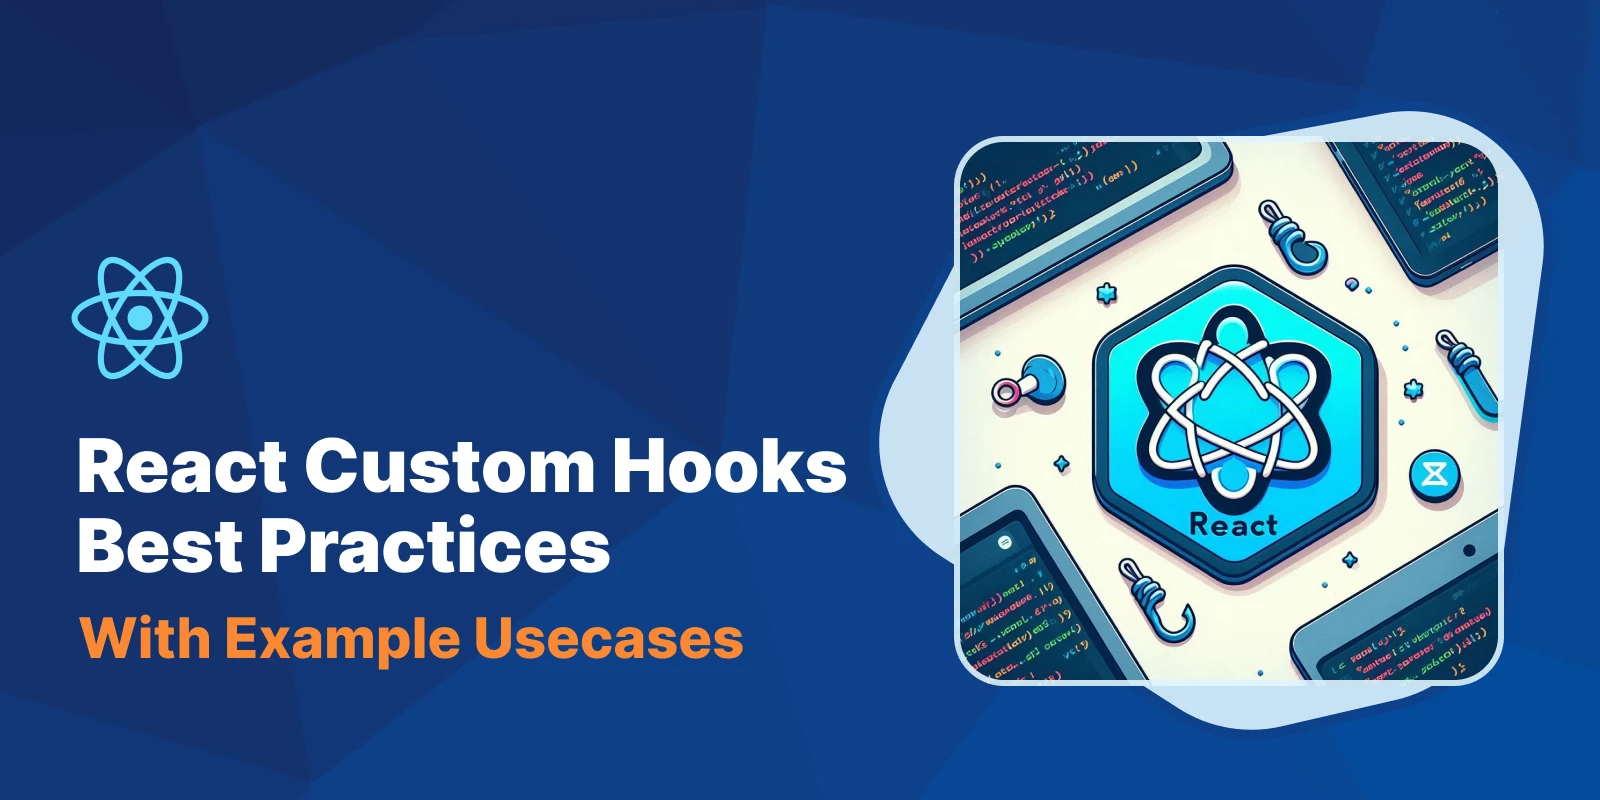 React Custom Hooks Best Practices: With Example Usecases